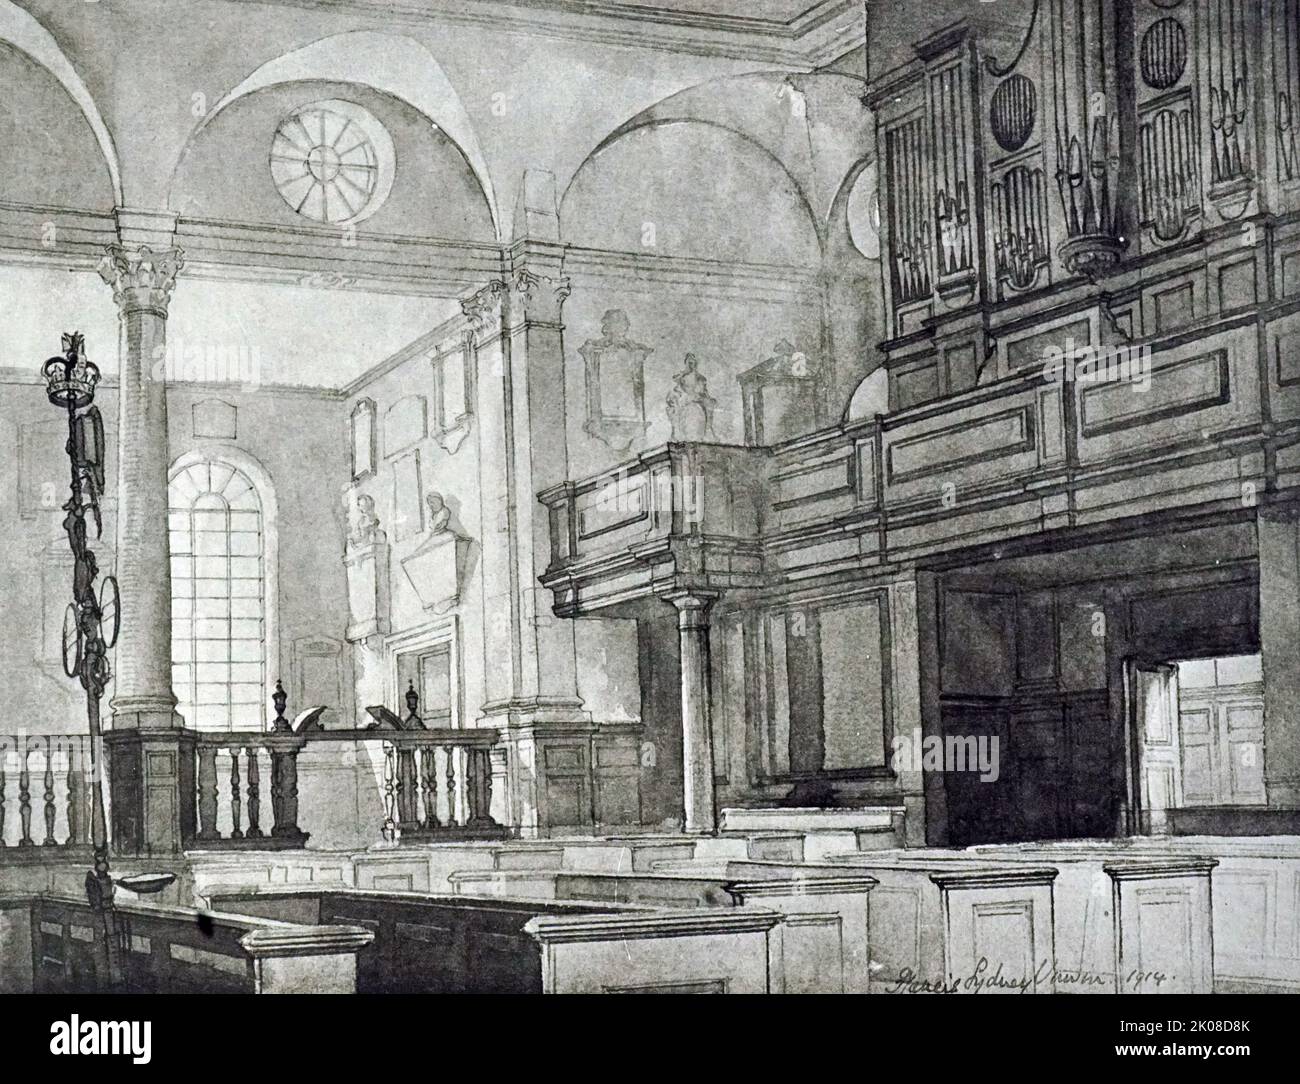 St Margaret Lothbury is a Church of England parish church on Lothbury in the City of London; it spans the boundary between Coleman Street Ward and Broad Street Ward. Recorded since the 12th century, the church was destroyed in the Great Fire of London in 1666 and rebuilt by the office of Sir Christopher Wren. Drawing by Sidney Unwin, 1914 Stock Photo